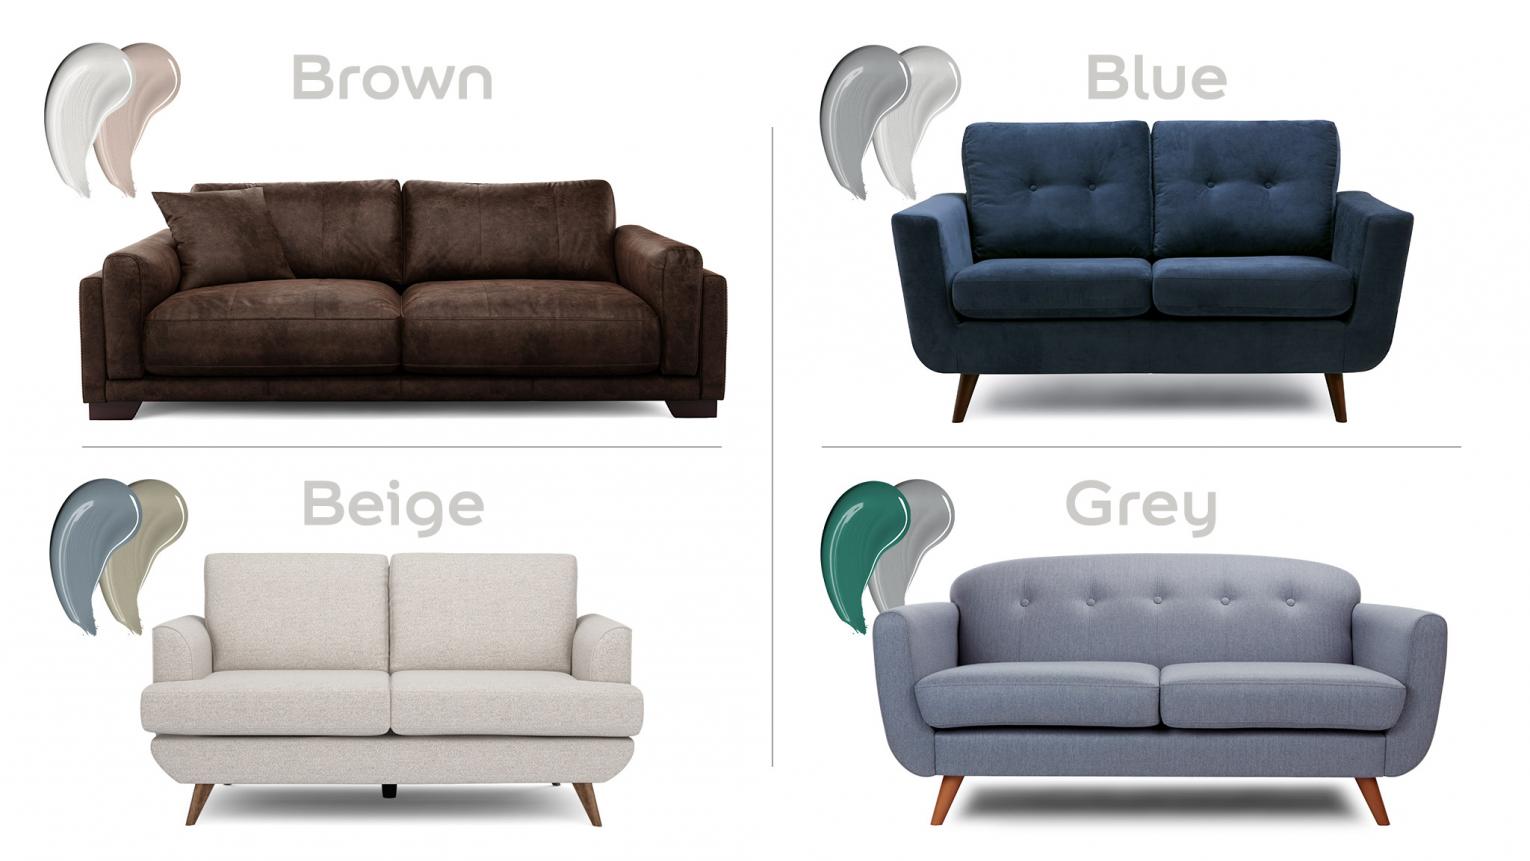 8 Paint Colours To Match Your Sofa Dulux, What Colours Go With Dark Blue Sofa